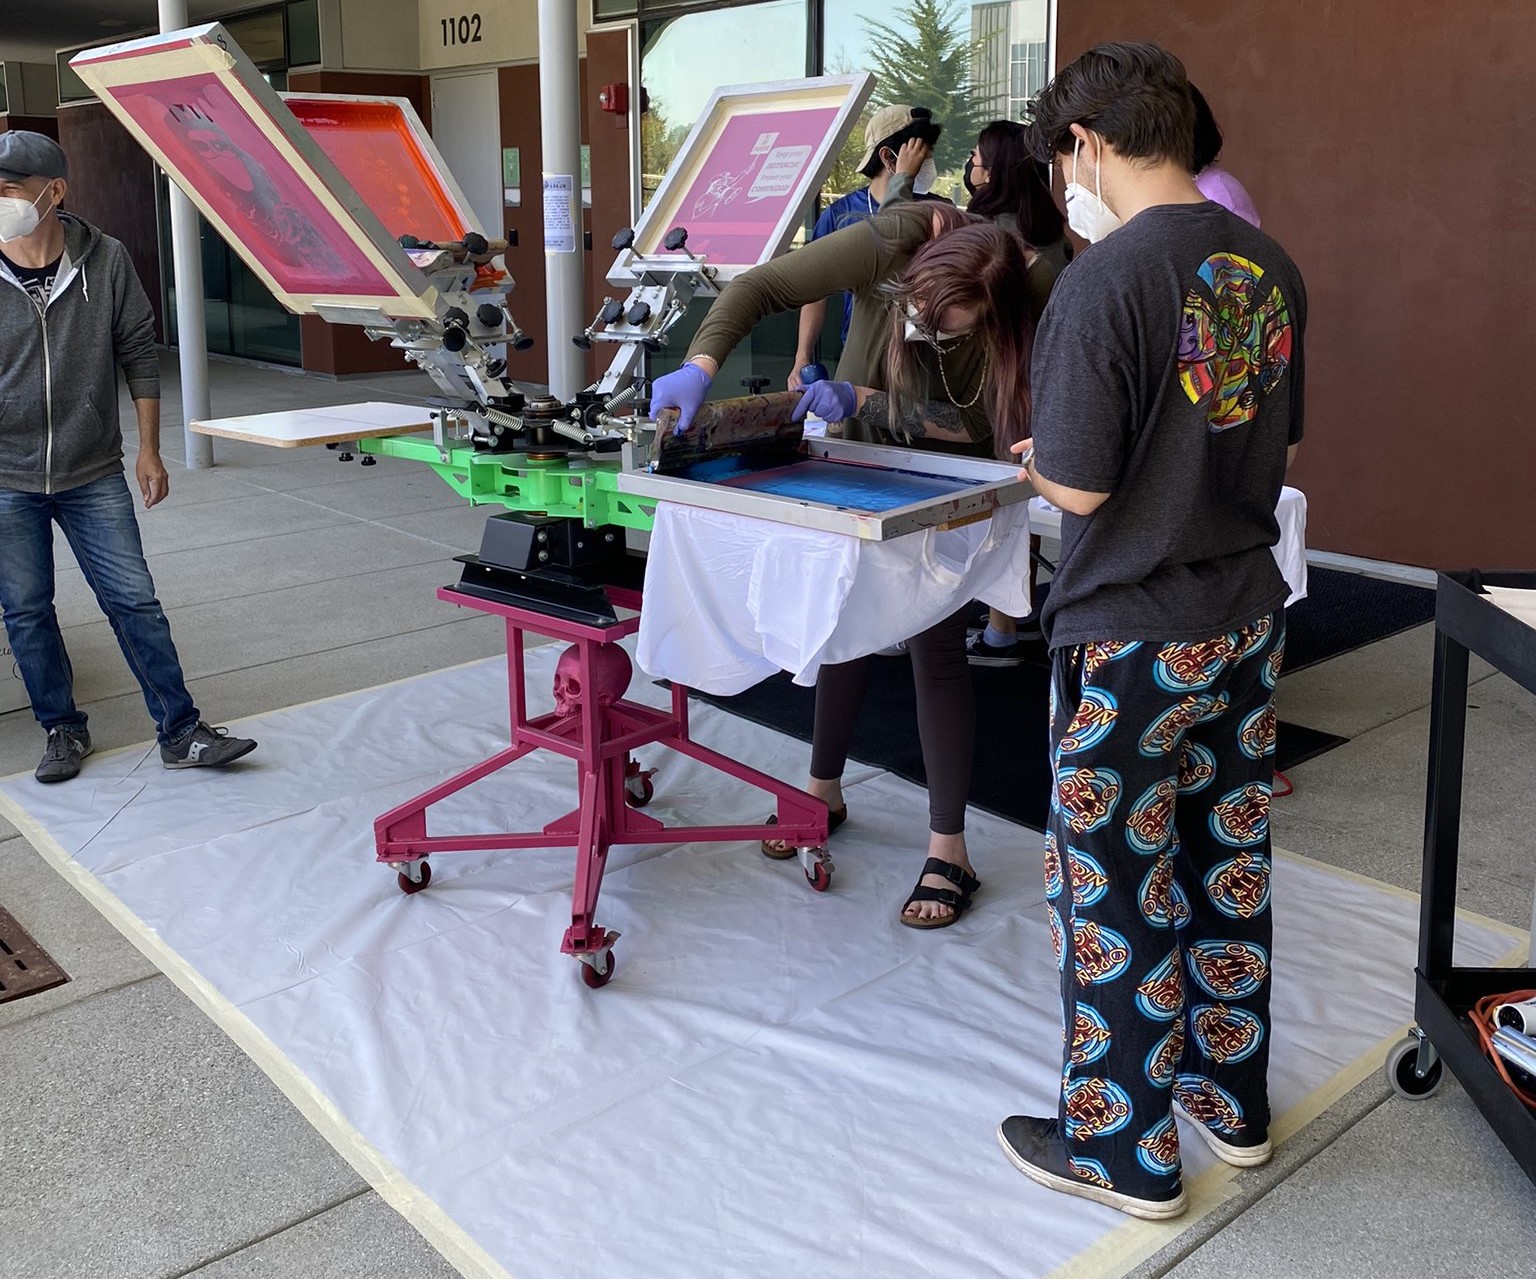 screenprinting station in use